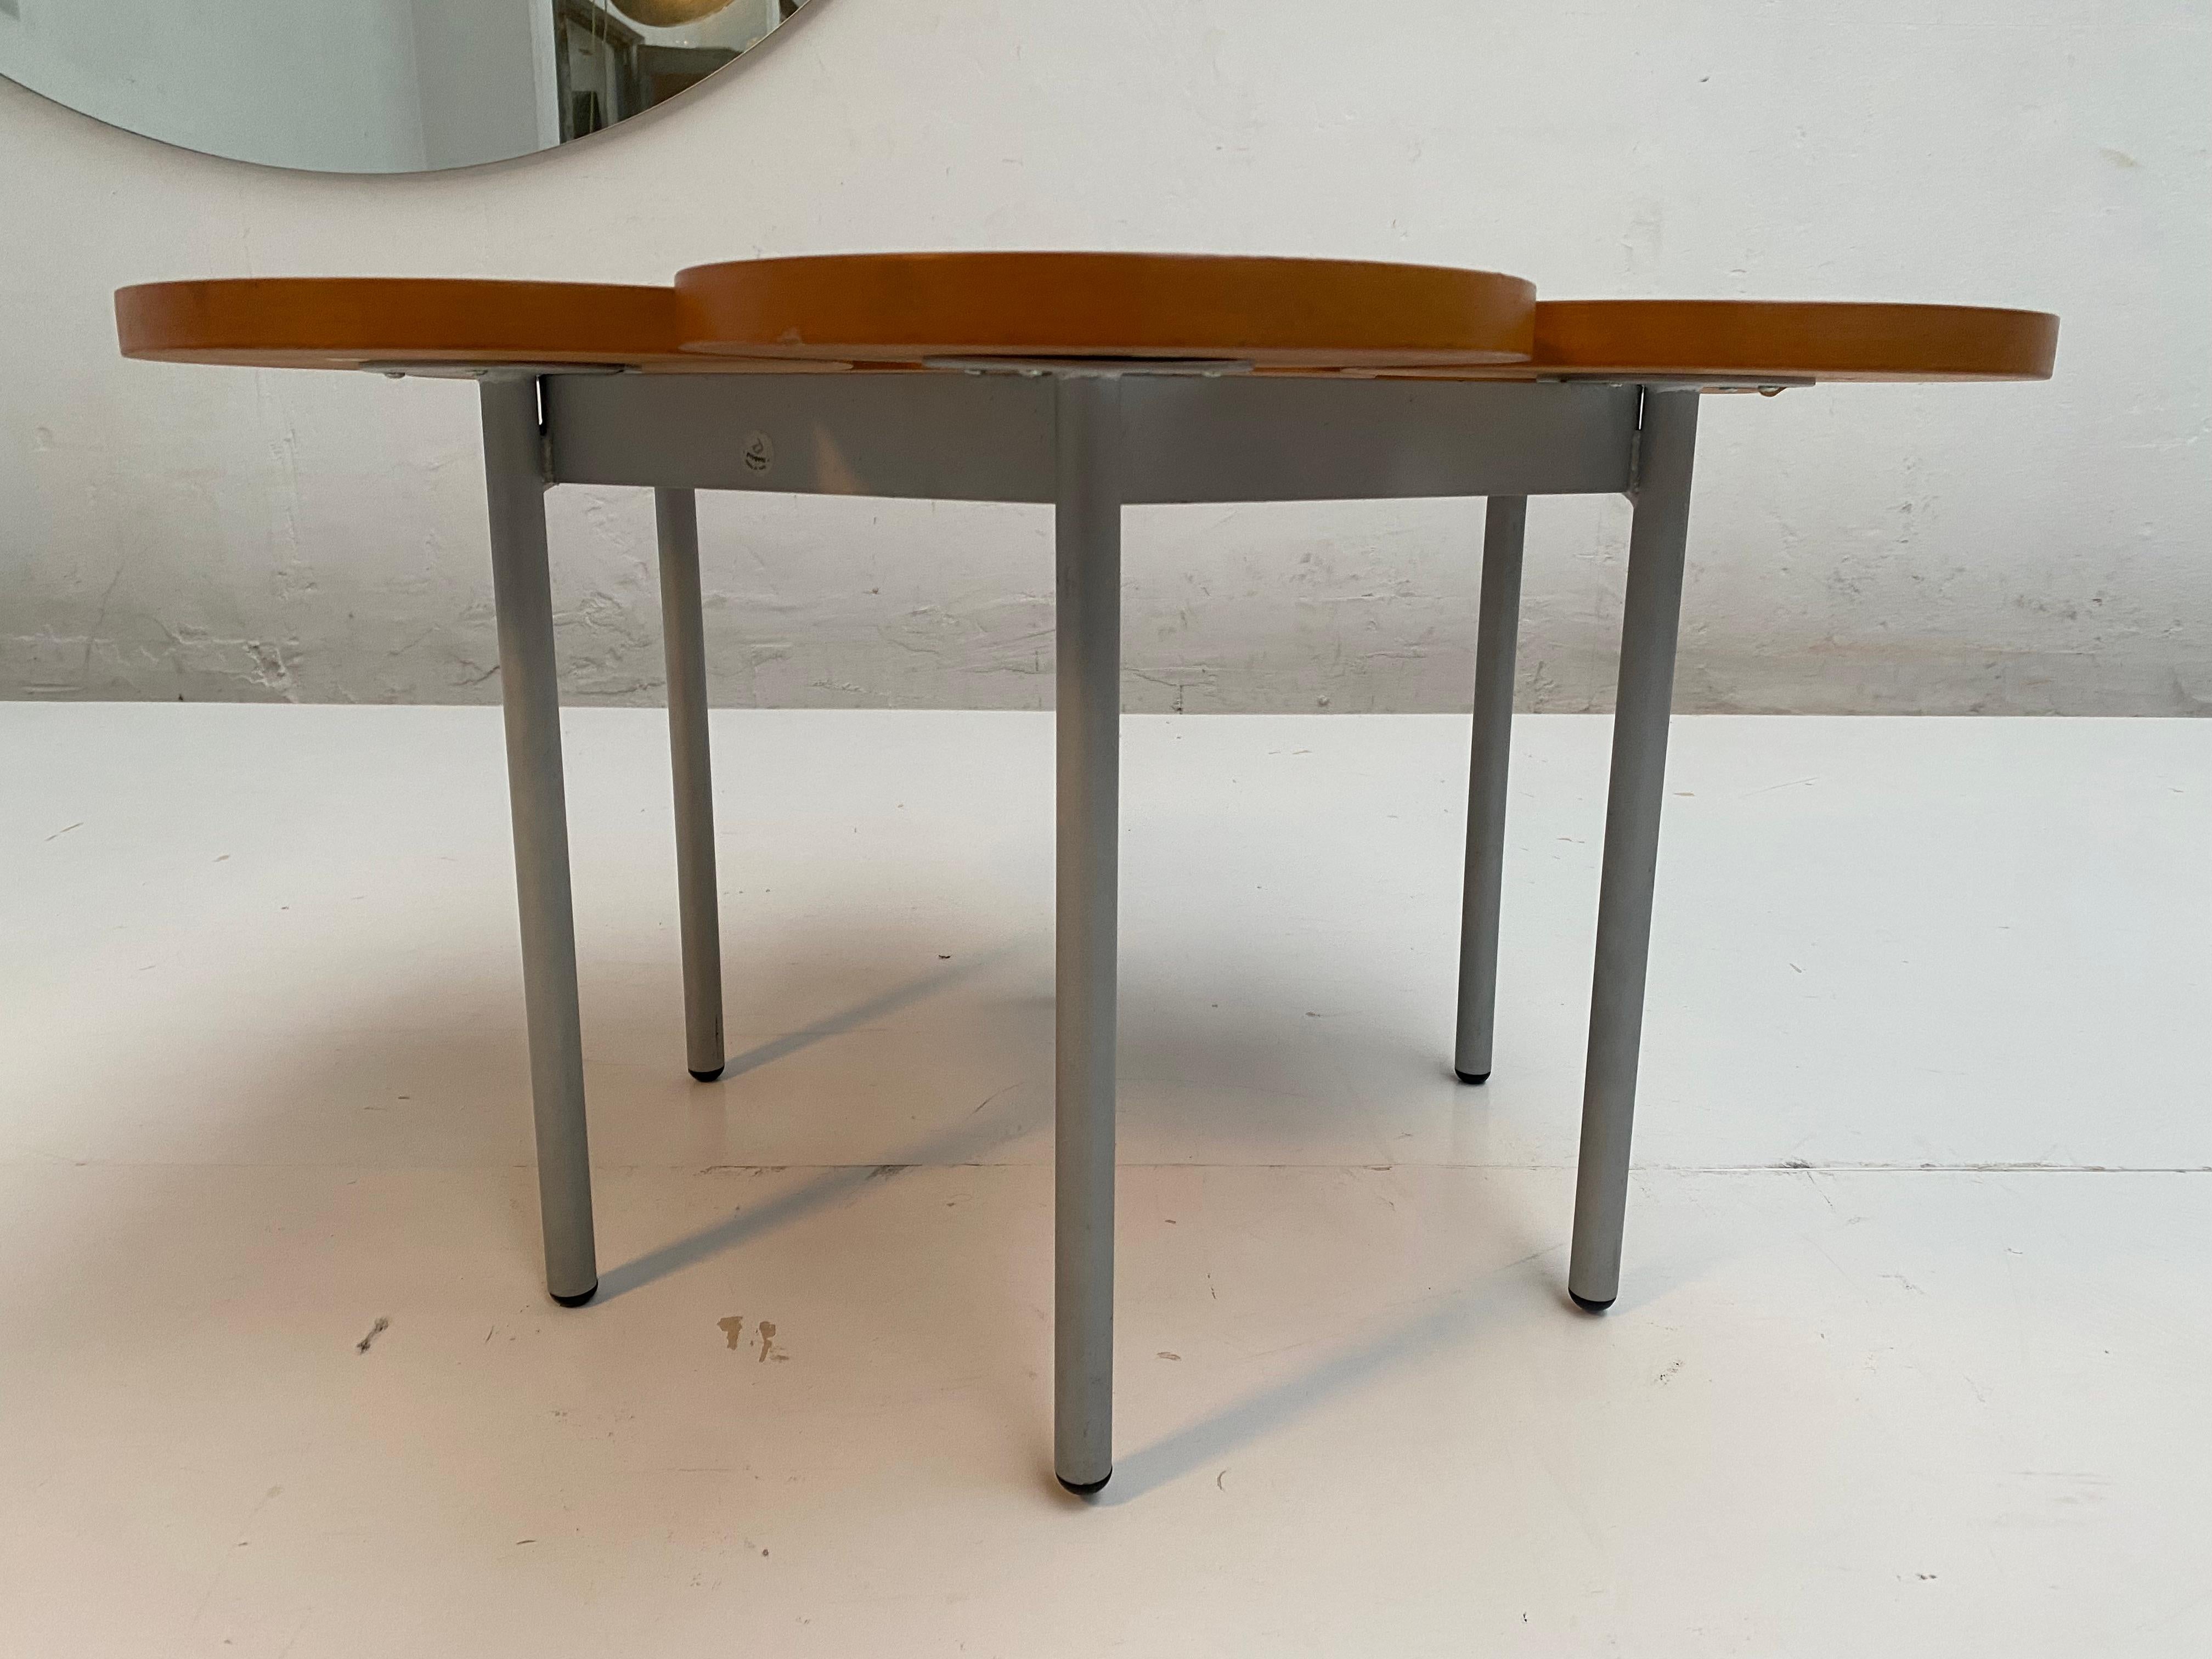 Contemporary Italian 'Flower' Shaped Side Table 'Progetti' Made in Italy 2000's  In Good Condition For Sale In bergen op zoom, NL